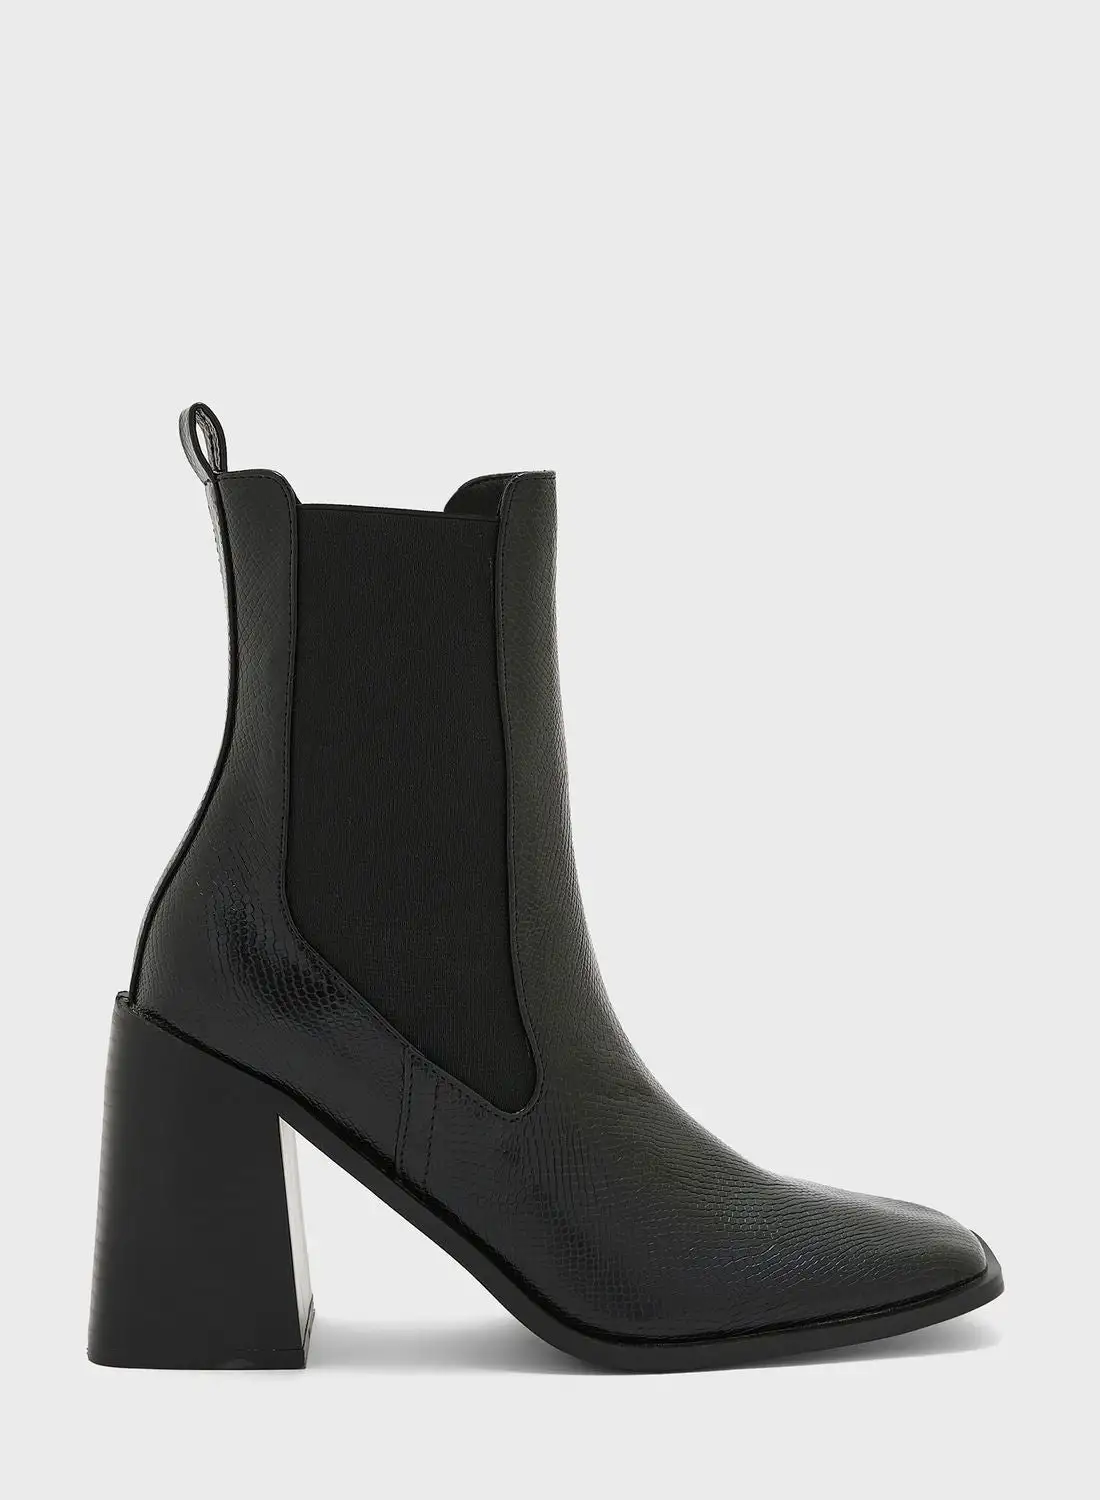 TOPSHOP Ocean Square Toe Ankle Boots